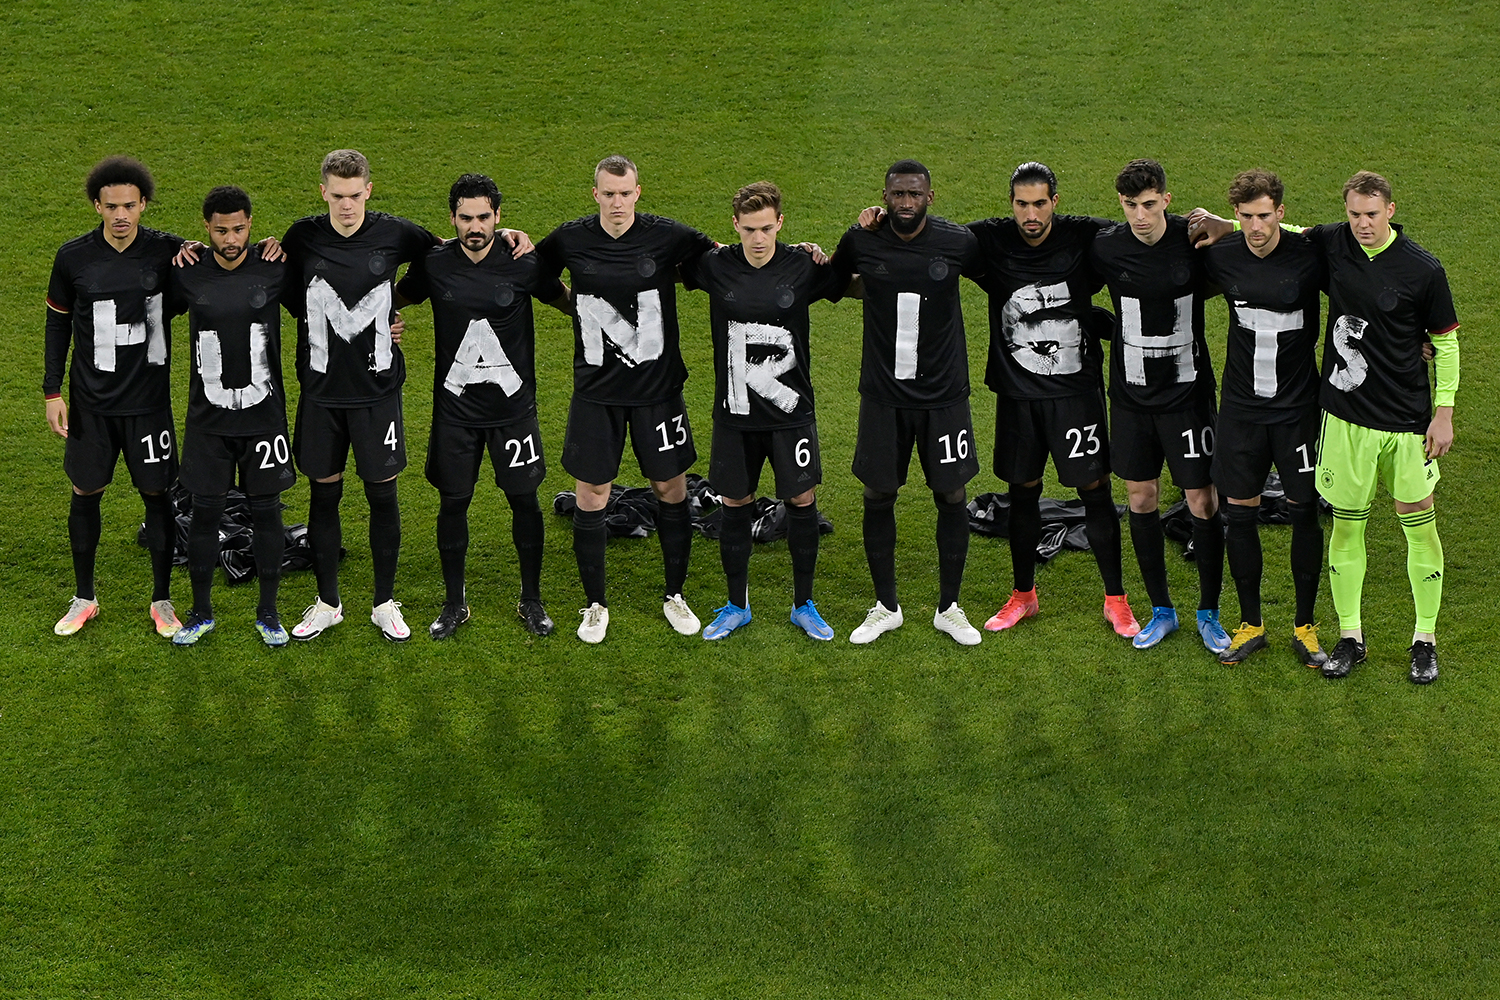 Players of Germany wear t-shirts which spell out "Human Rights" prior to the FIFA World Cup 2022 Qatar qualifying match between Germany and Iceland on March 25, 2021 in Duisburg, Germany.